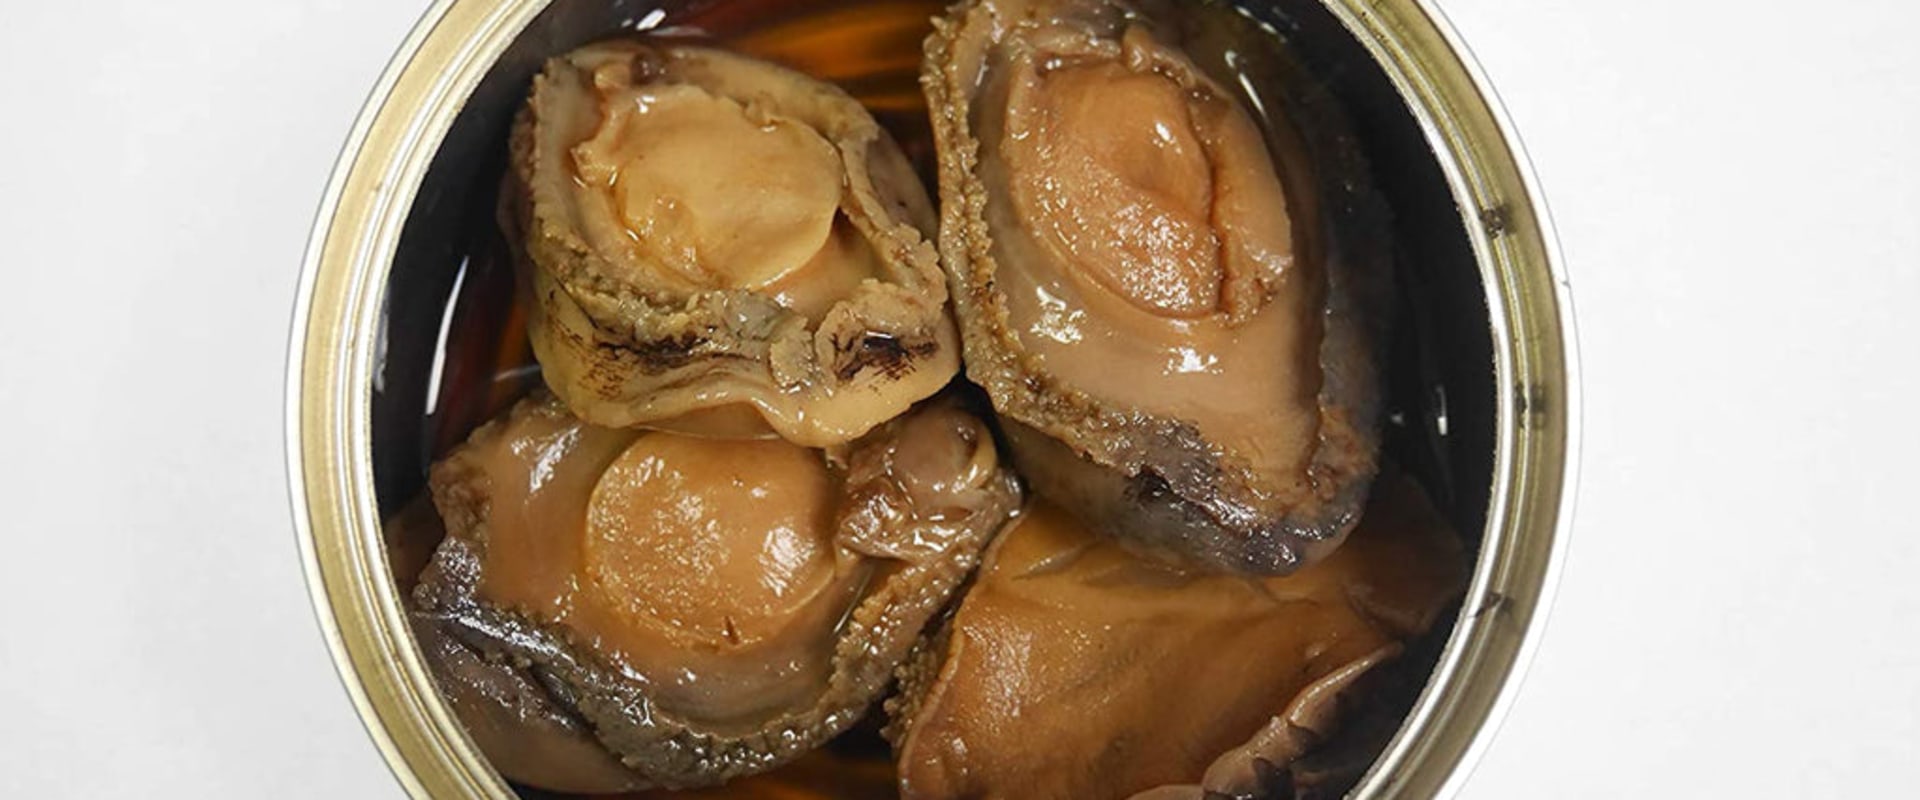 Where to Find the Best Canned Abalone in Singapore